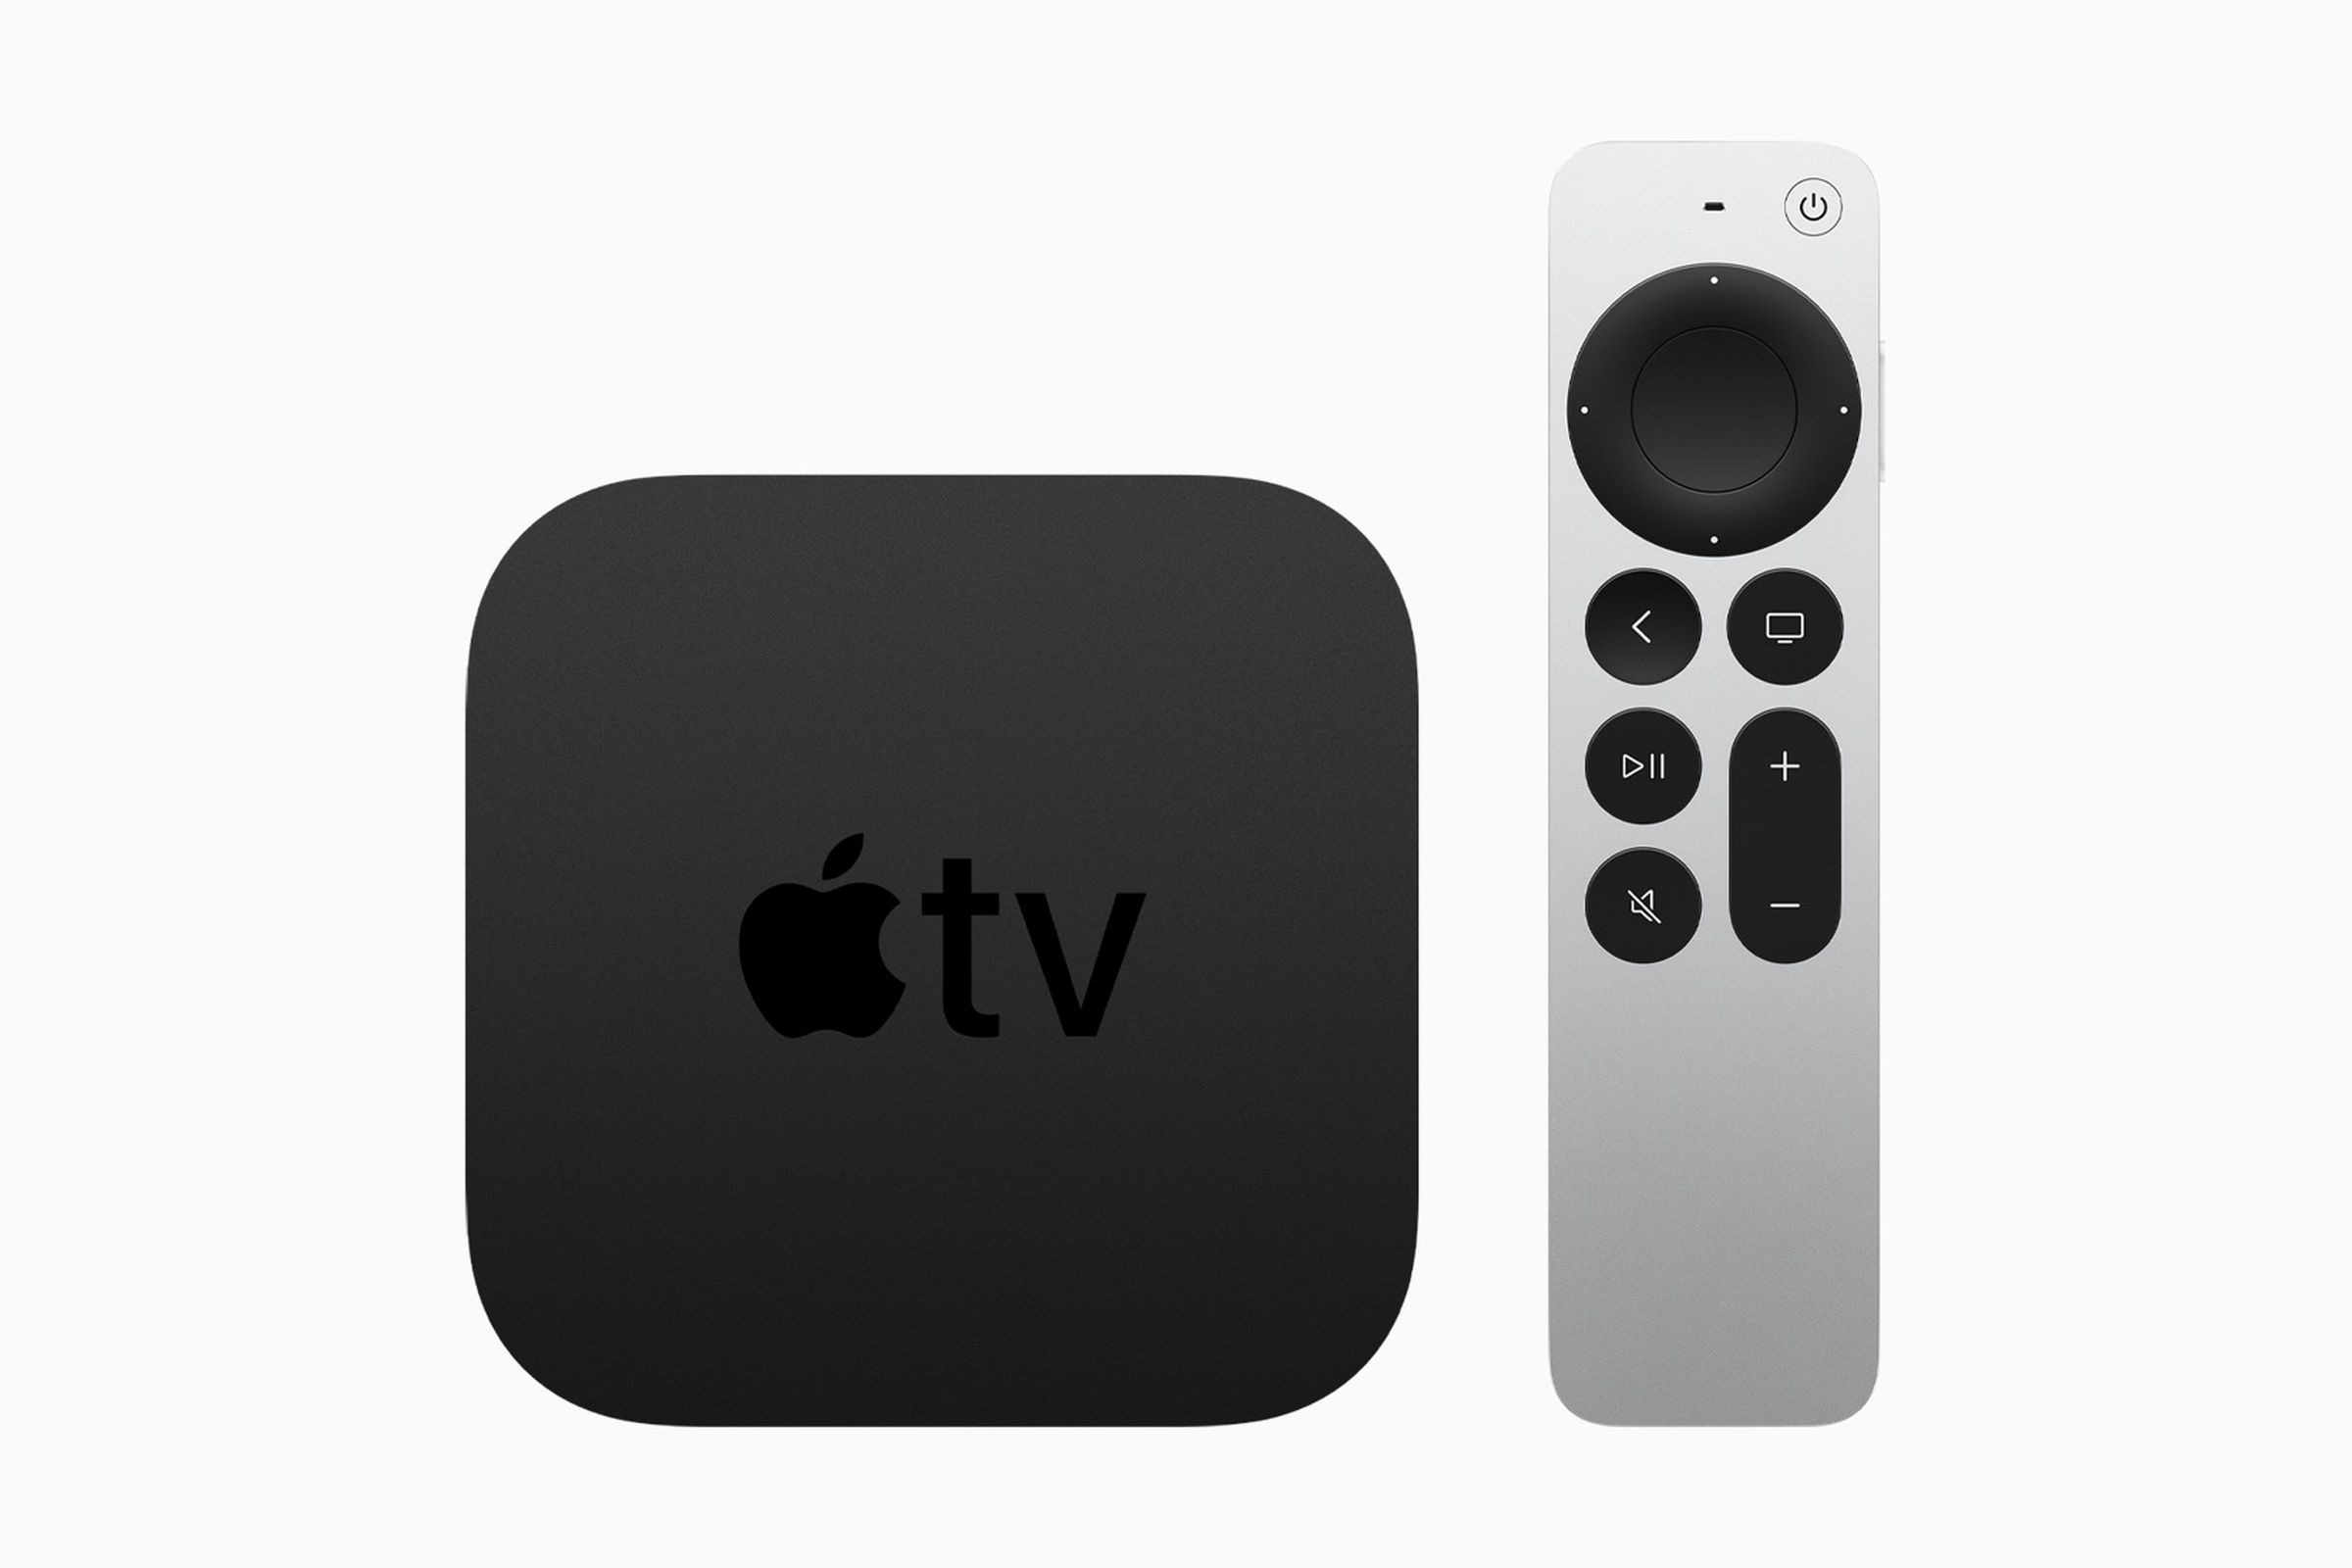 The new Apple TV 4K with redesigned remote